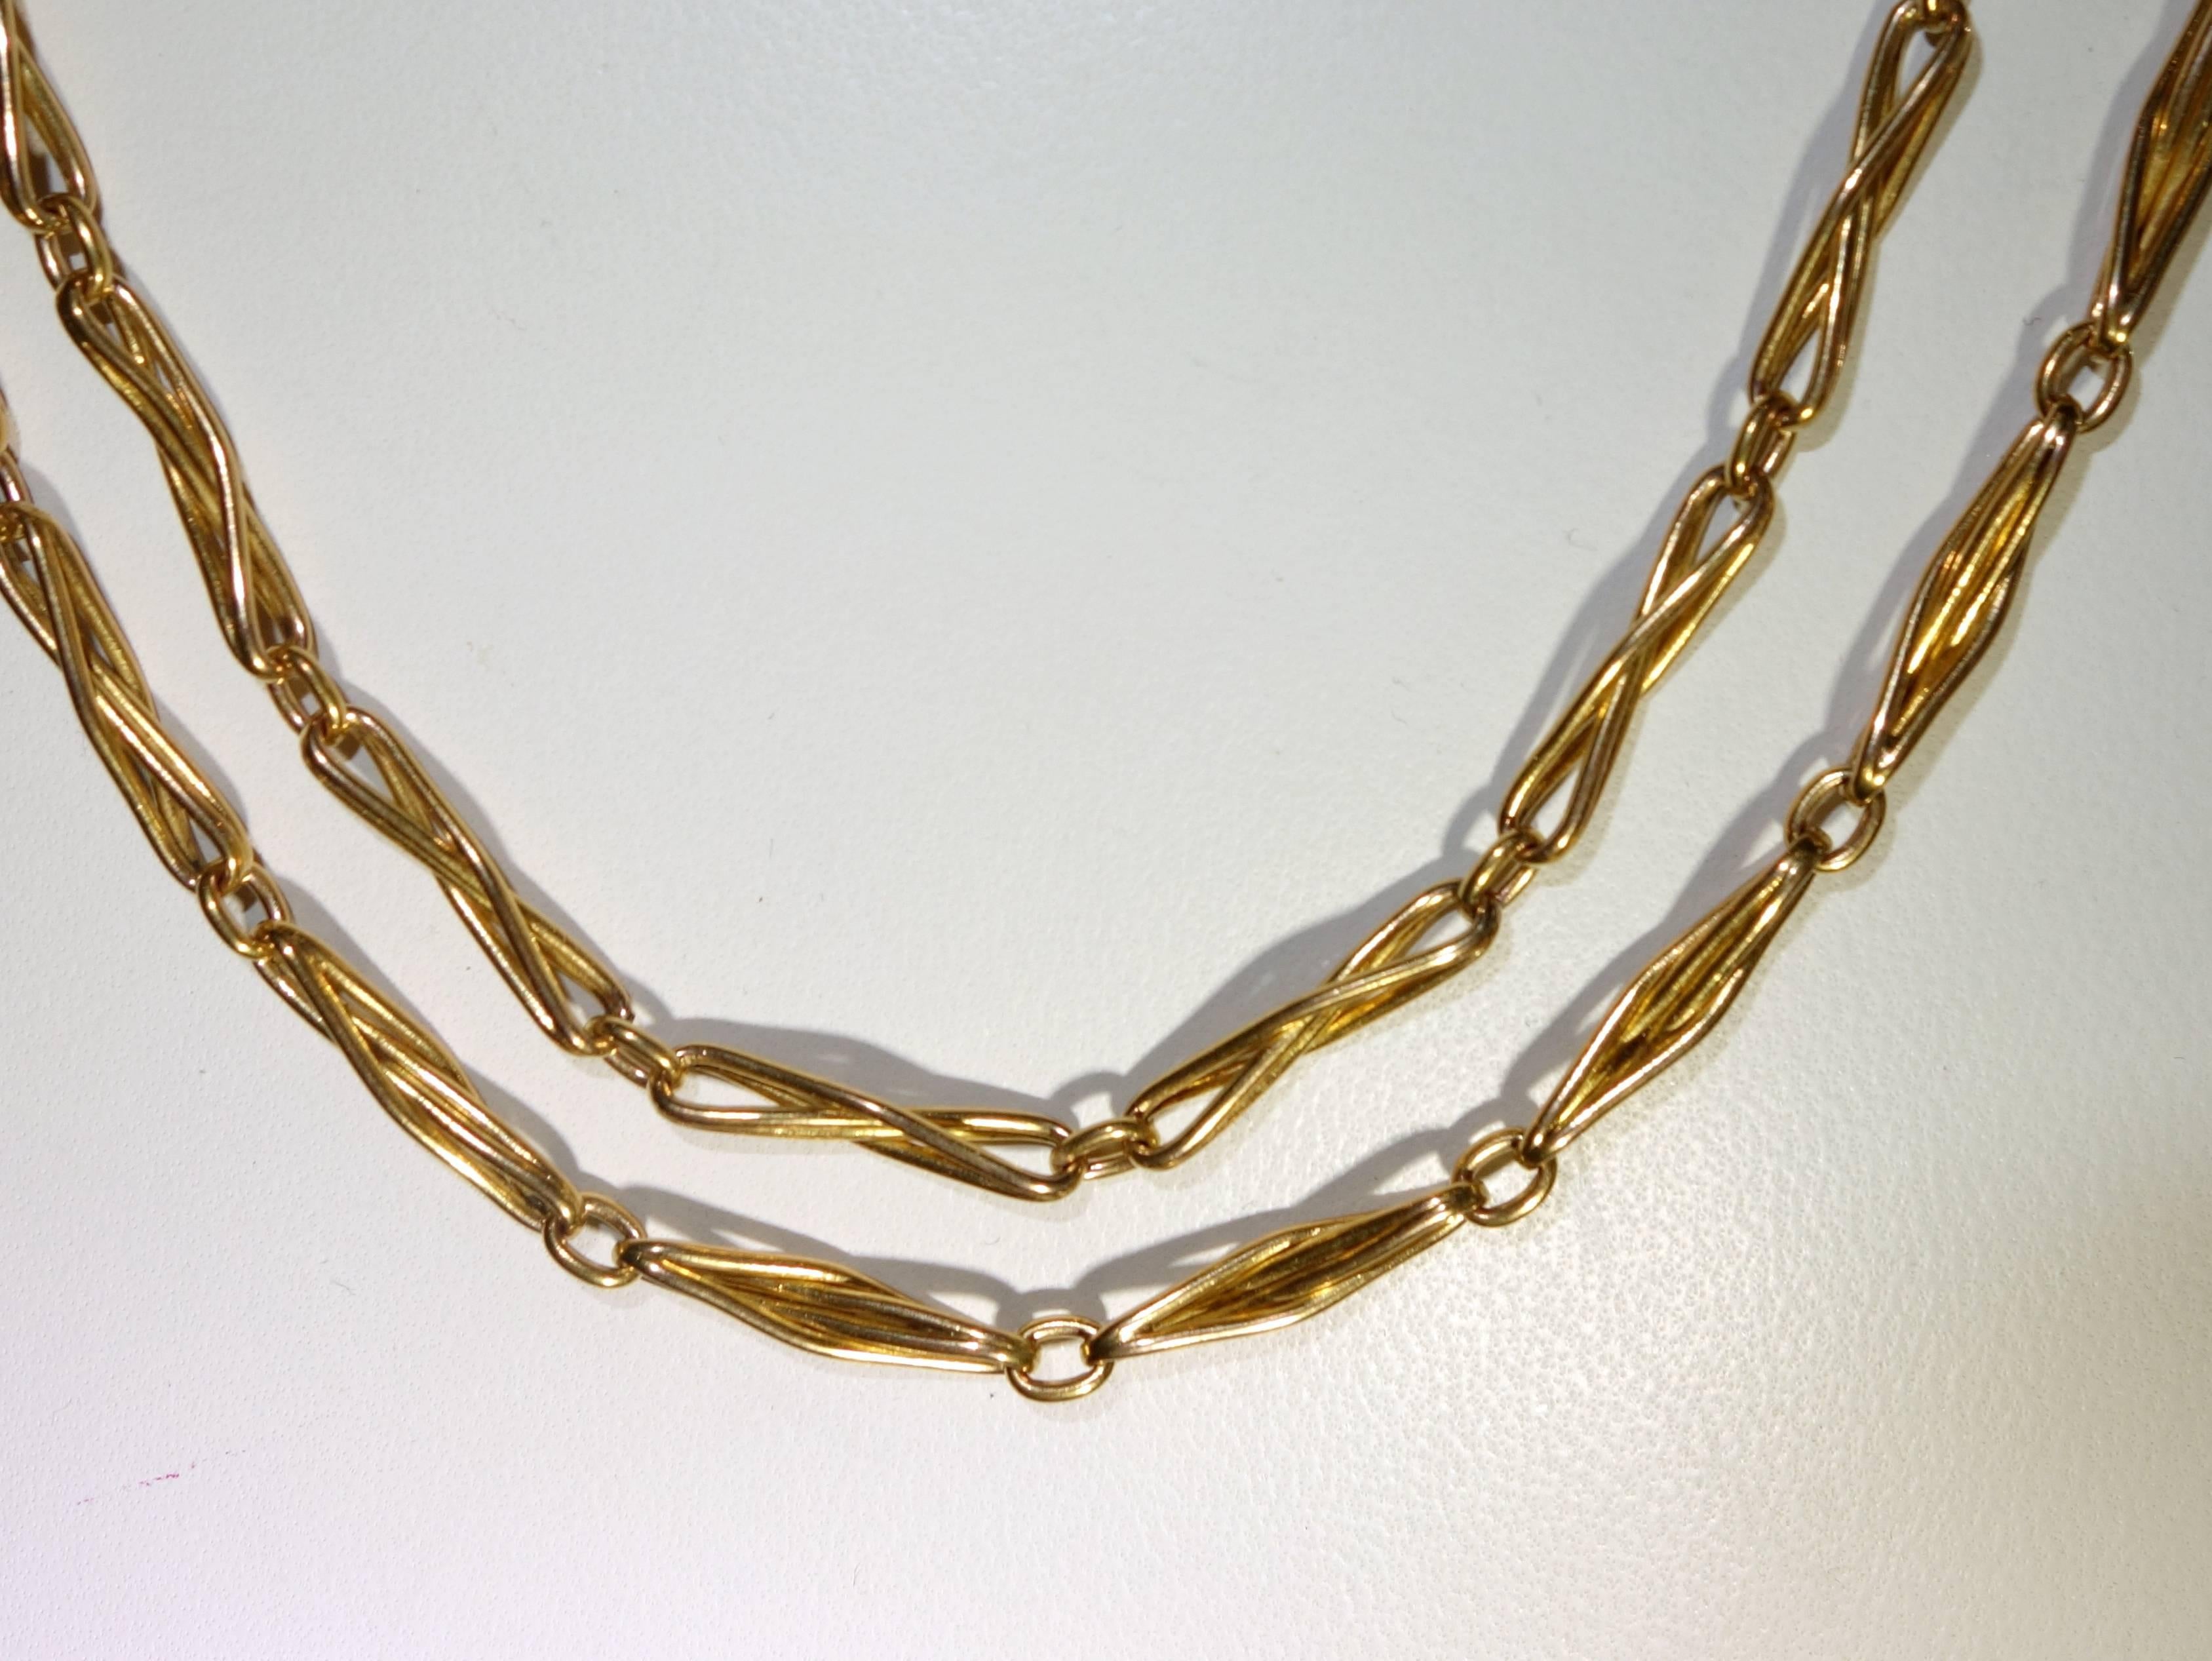 62 inches long, this 18K necklace is as supple with a distinctive link. 60 .45 grams.  It is long enough to wear tripled around the neckline.